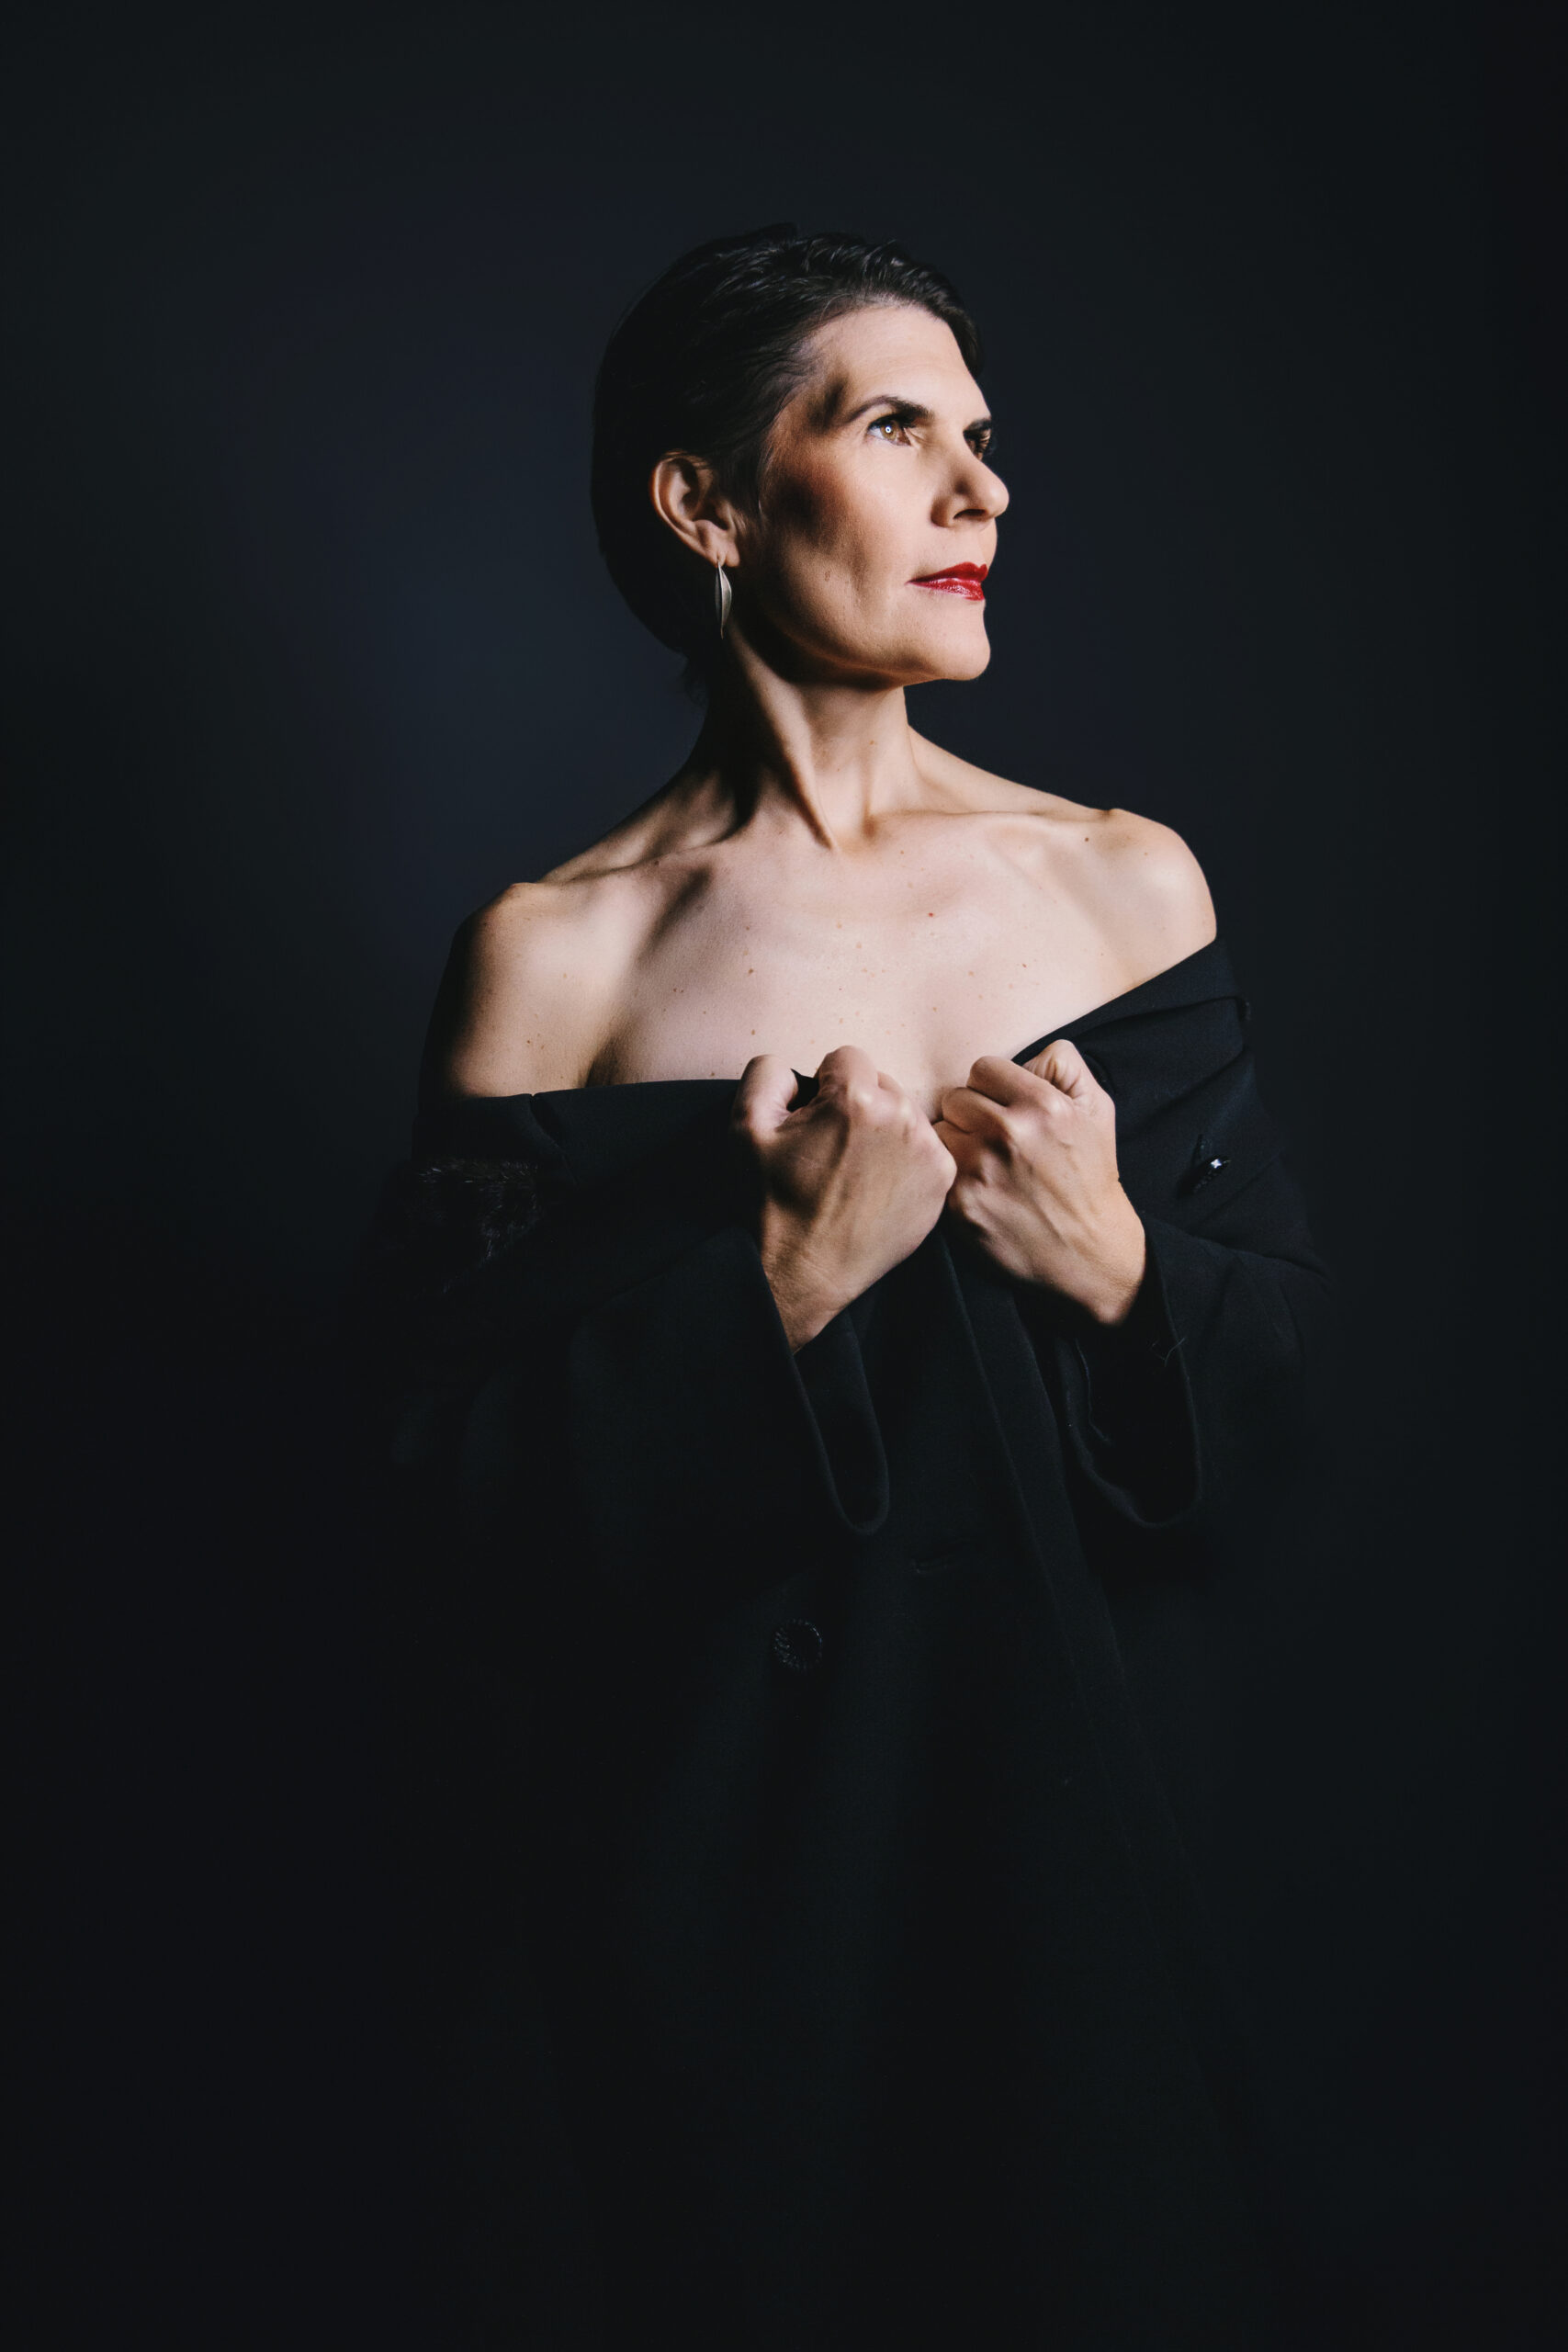 Woman in black off shoulder top with black background shows how to age well after forty. Photography by Lindsay Hite.